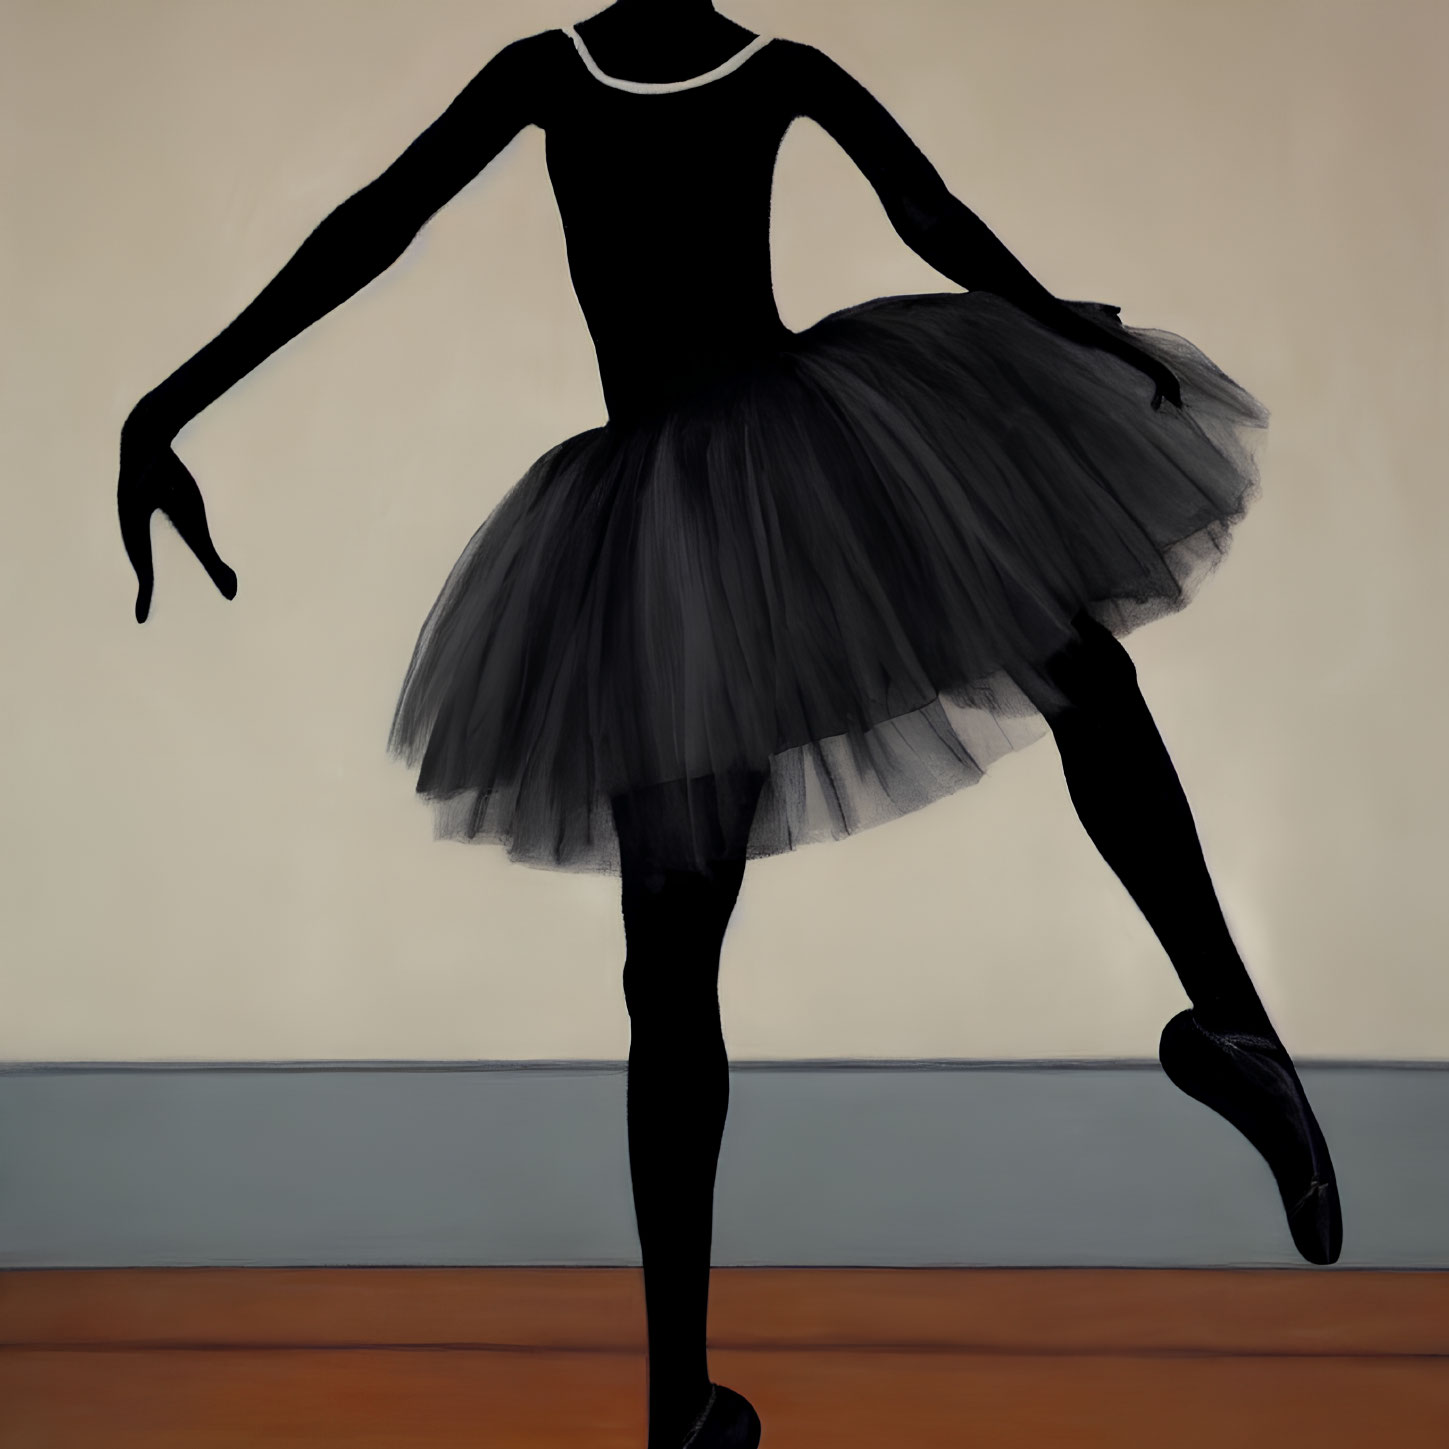 Ballet dancer silhouette in tutu with lifted leg pose